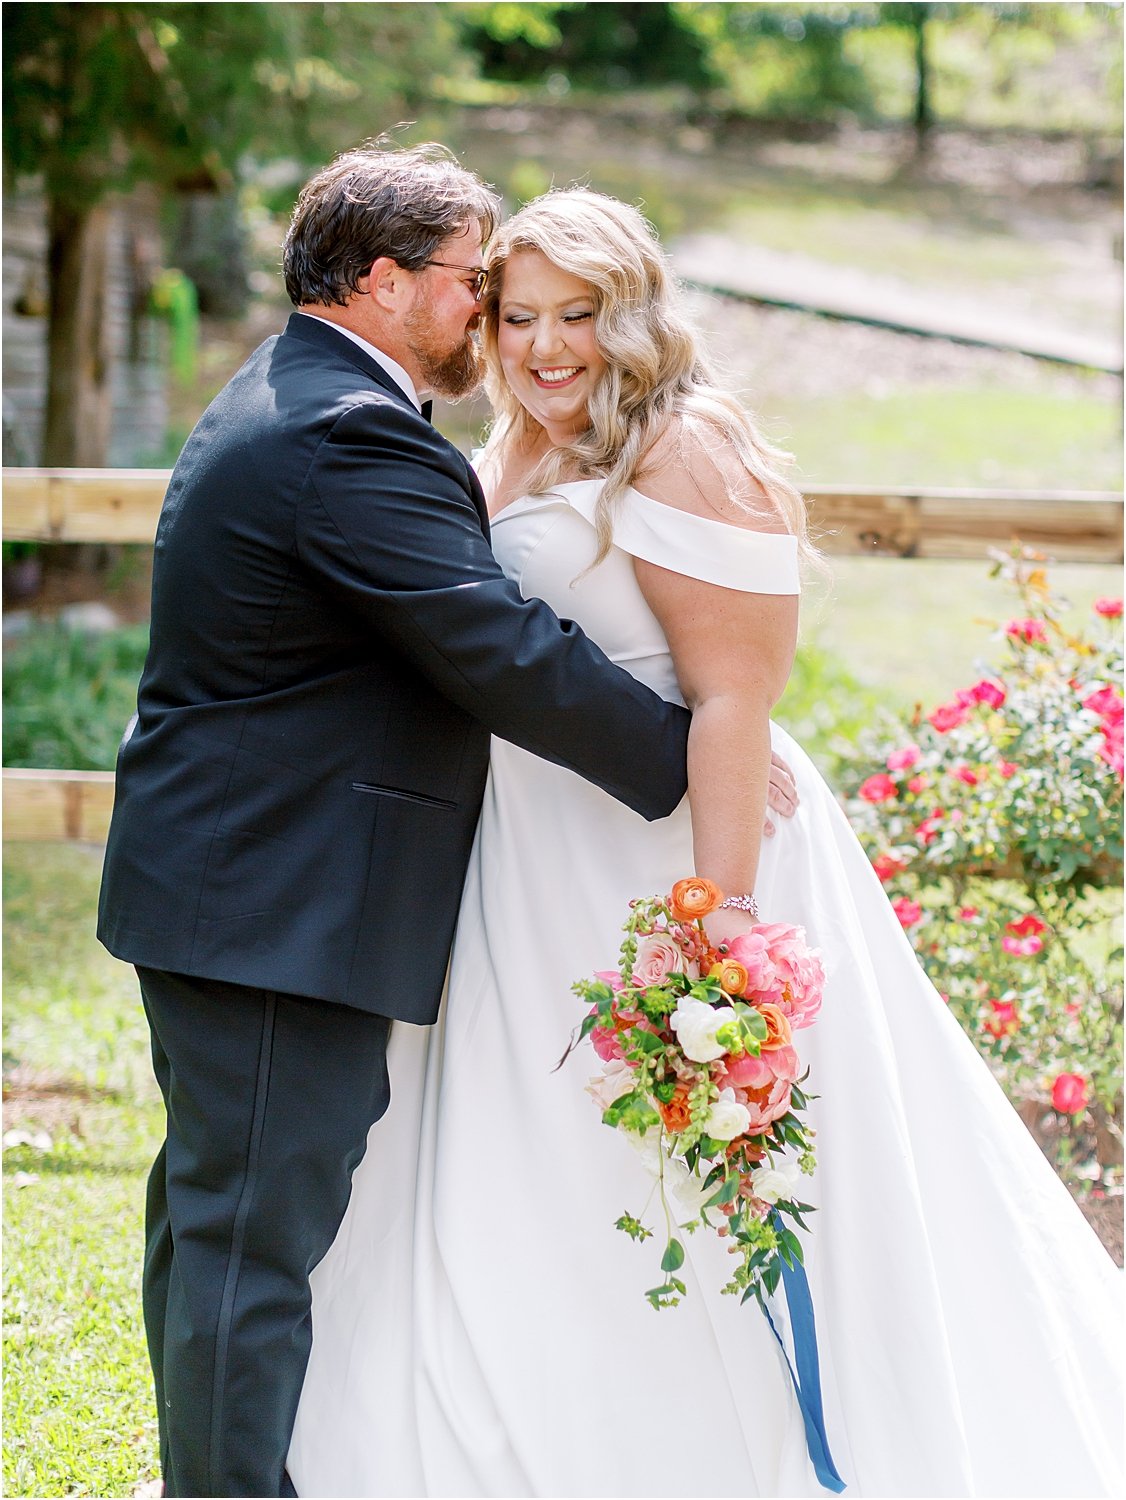 Southern summer Bride and Groom photo inspiration 